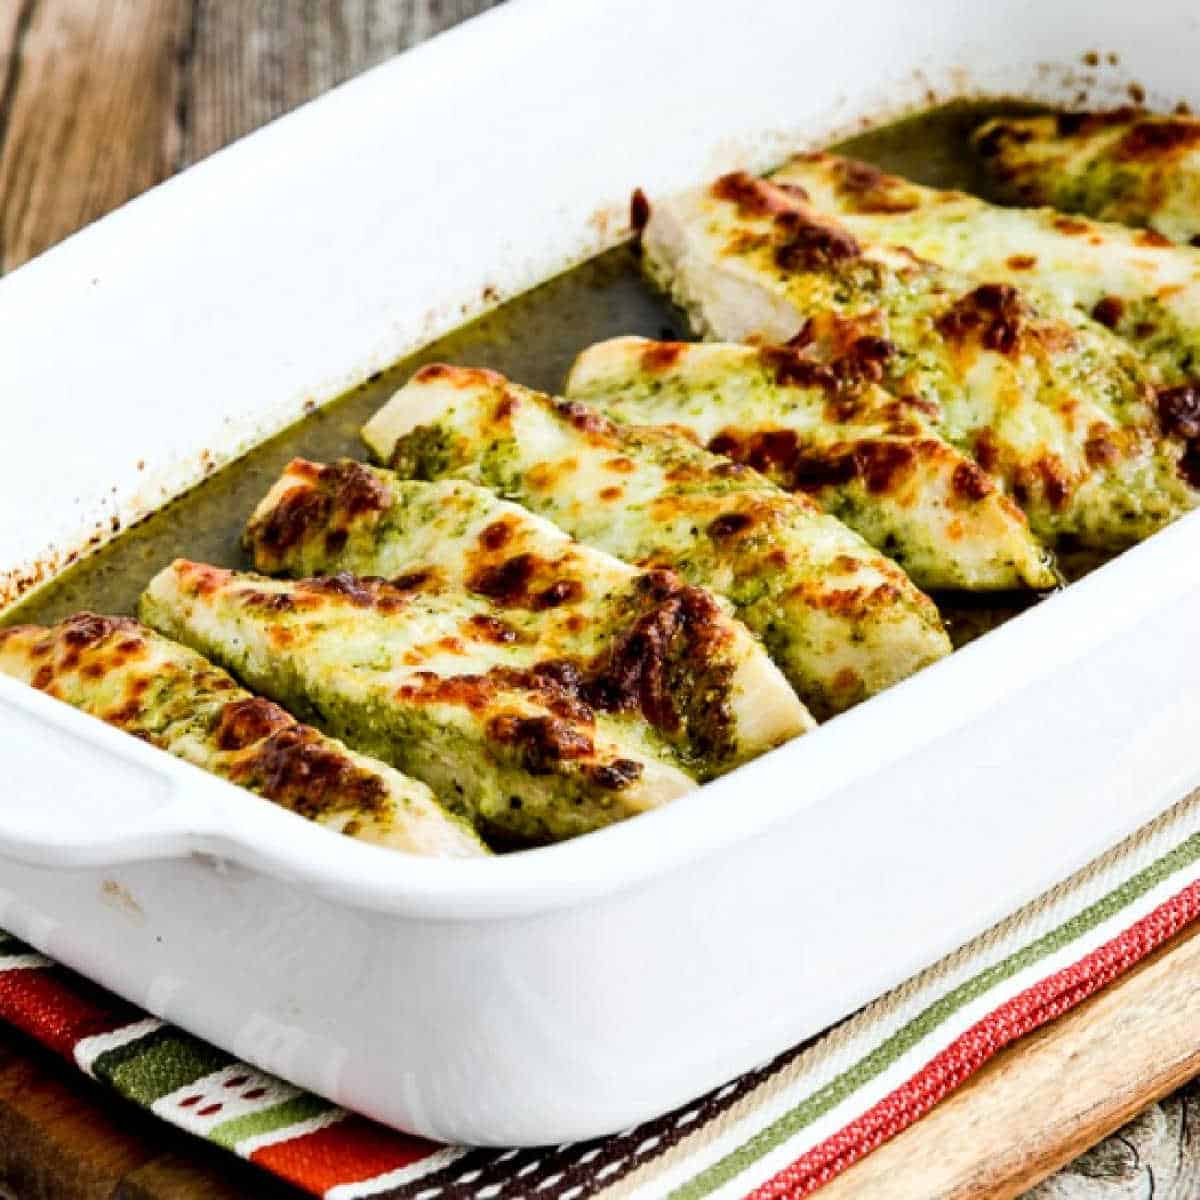 Square image of easy baked pesto chicken in a baking dish on a striped napkin